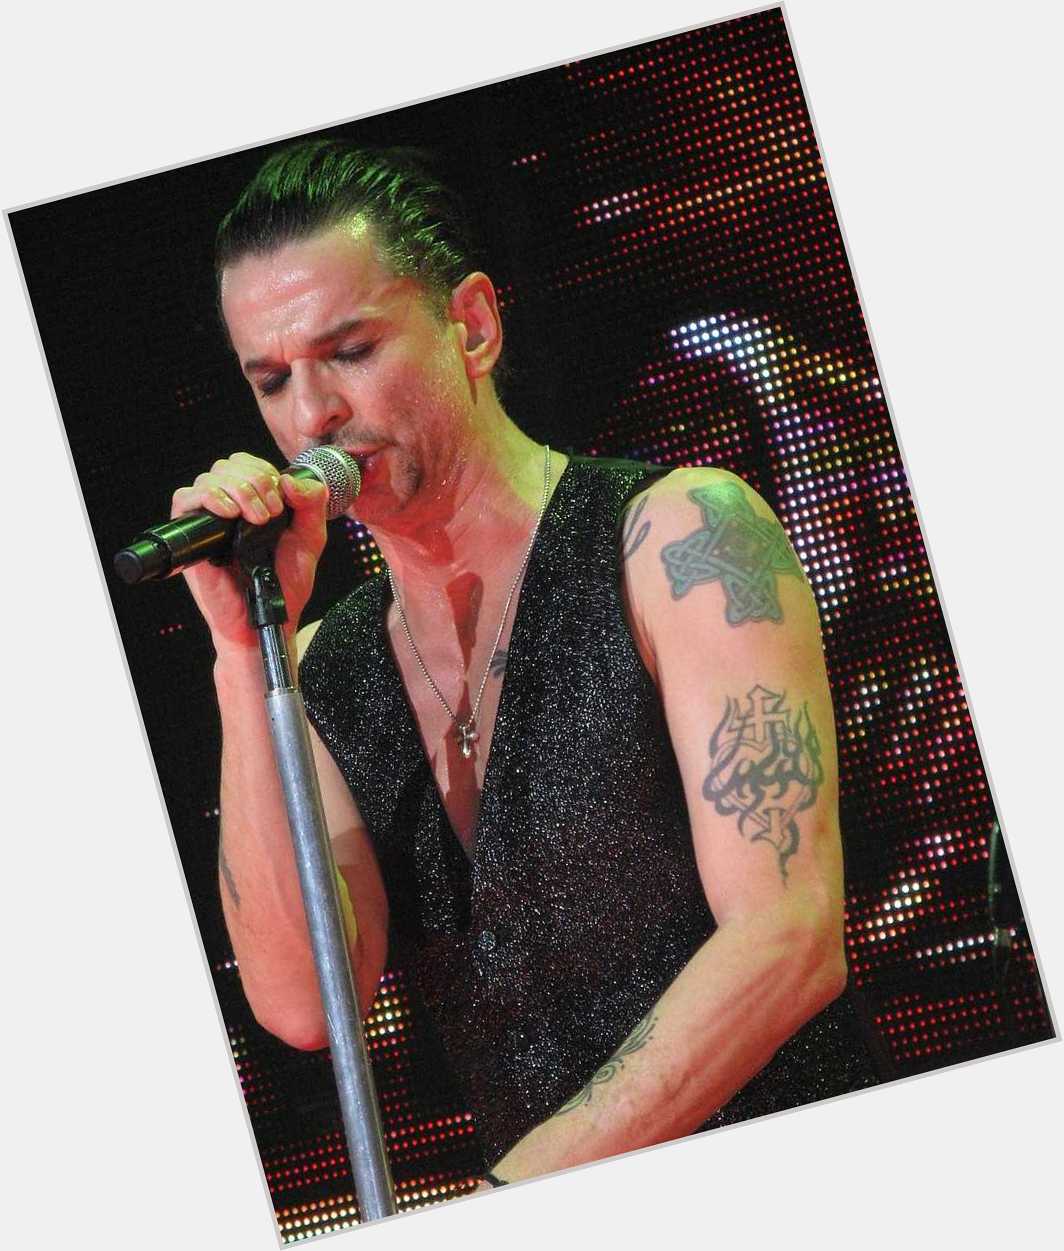 Happy 58th birthday to Depeche Mode front man Dave Gahan! What\s your favorite Depeche mode song?  